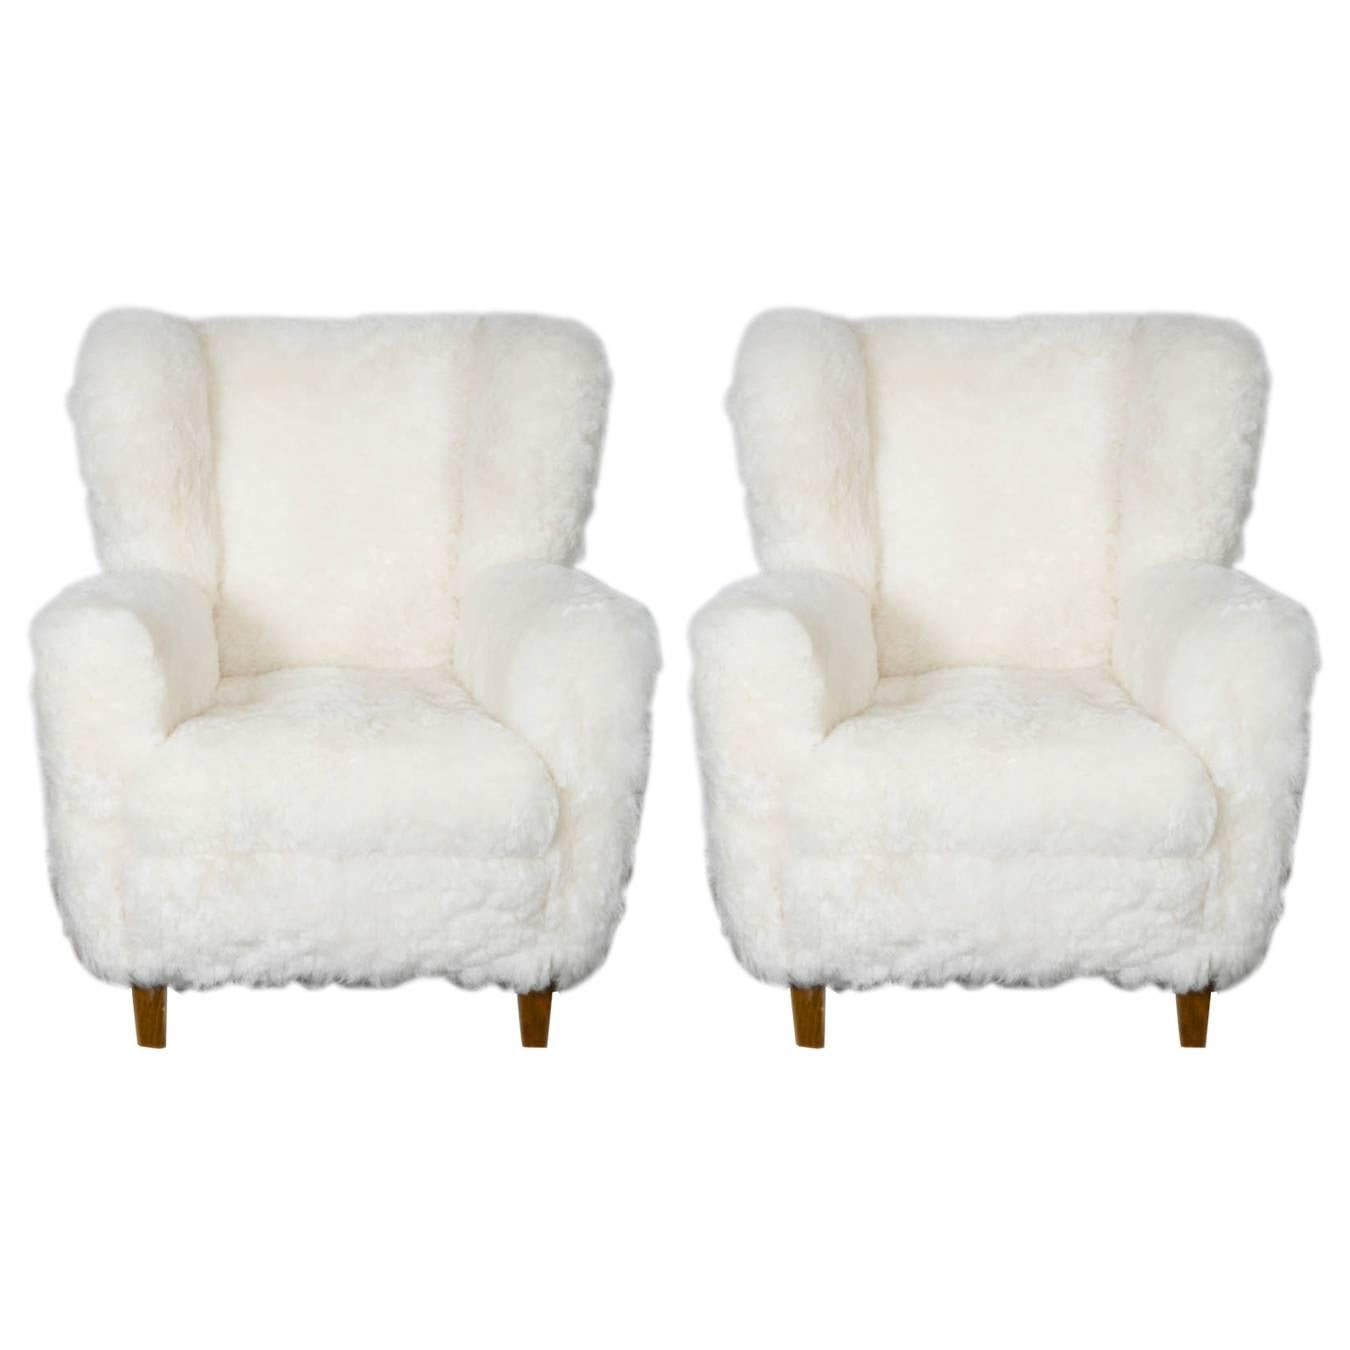 Great Pair of Lounge Chairs Upholstered in Sheepskin